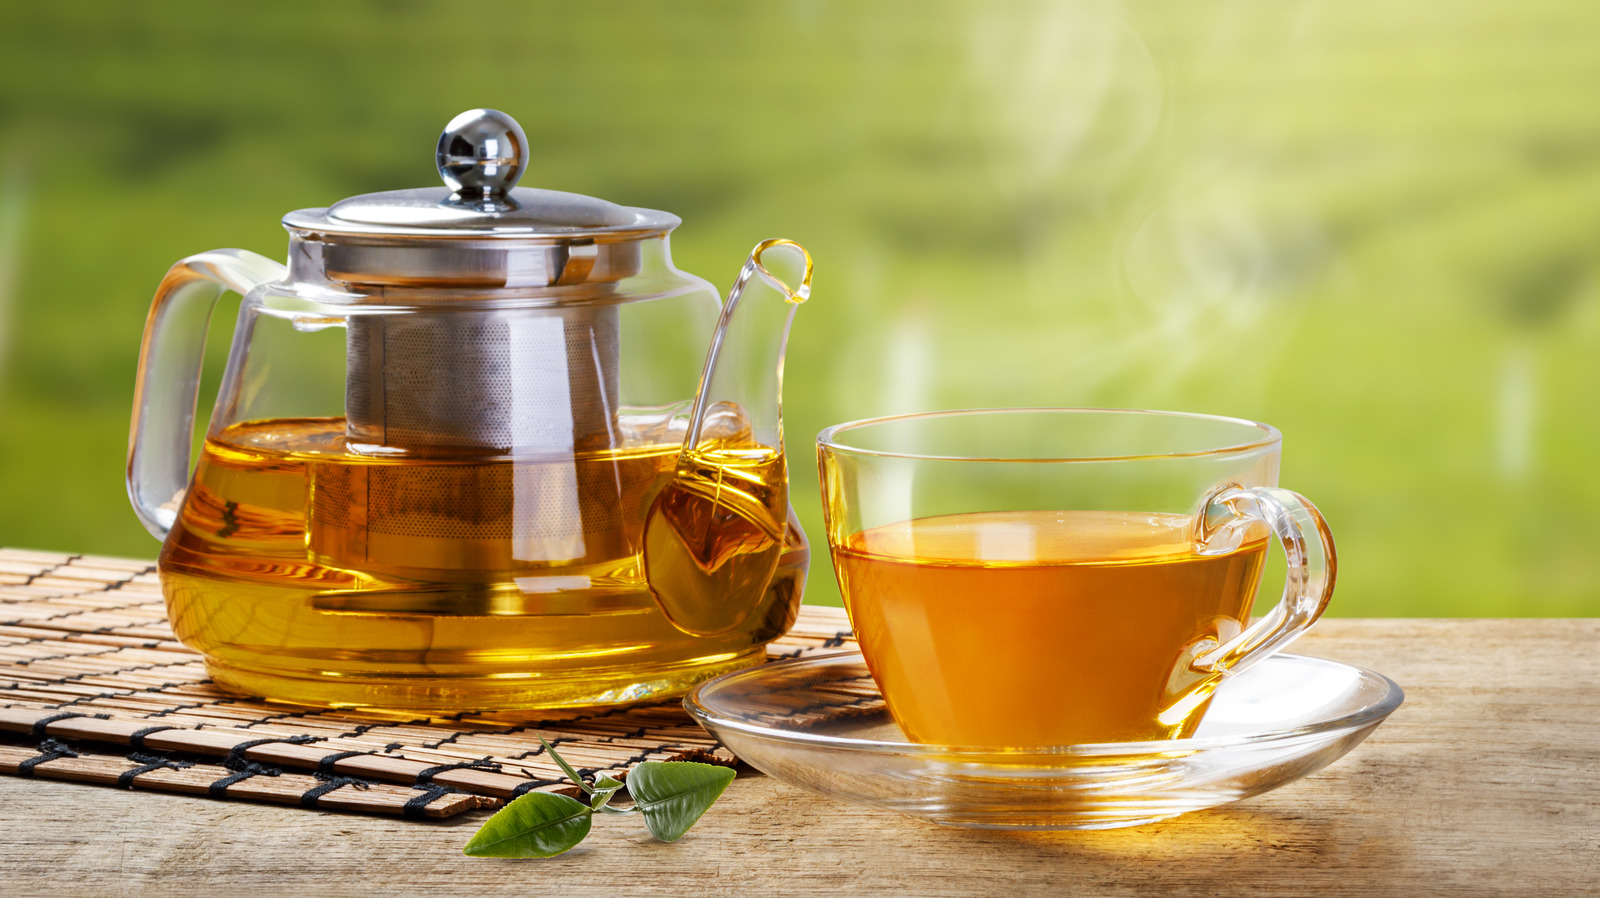 Tested by Experts: The Top 15 Teas